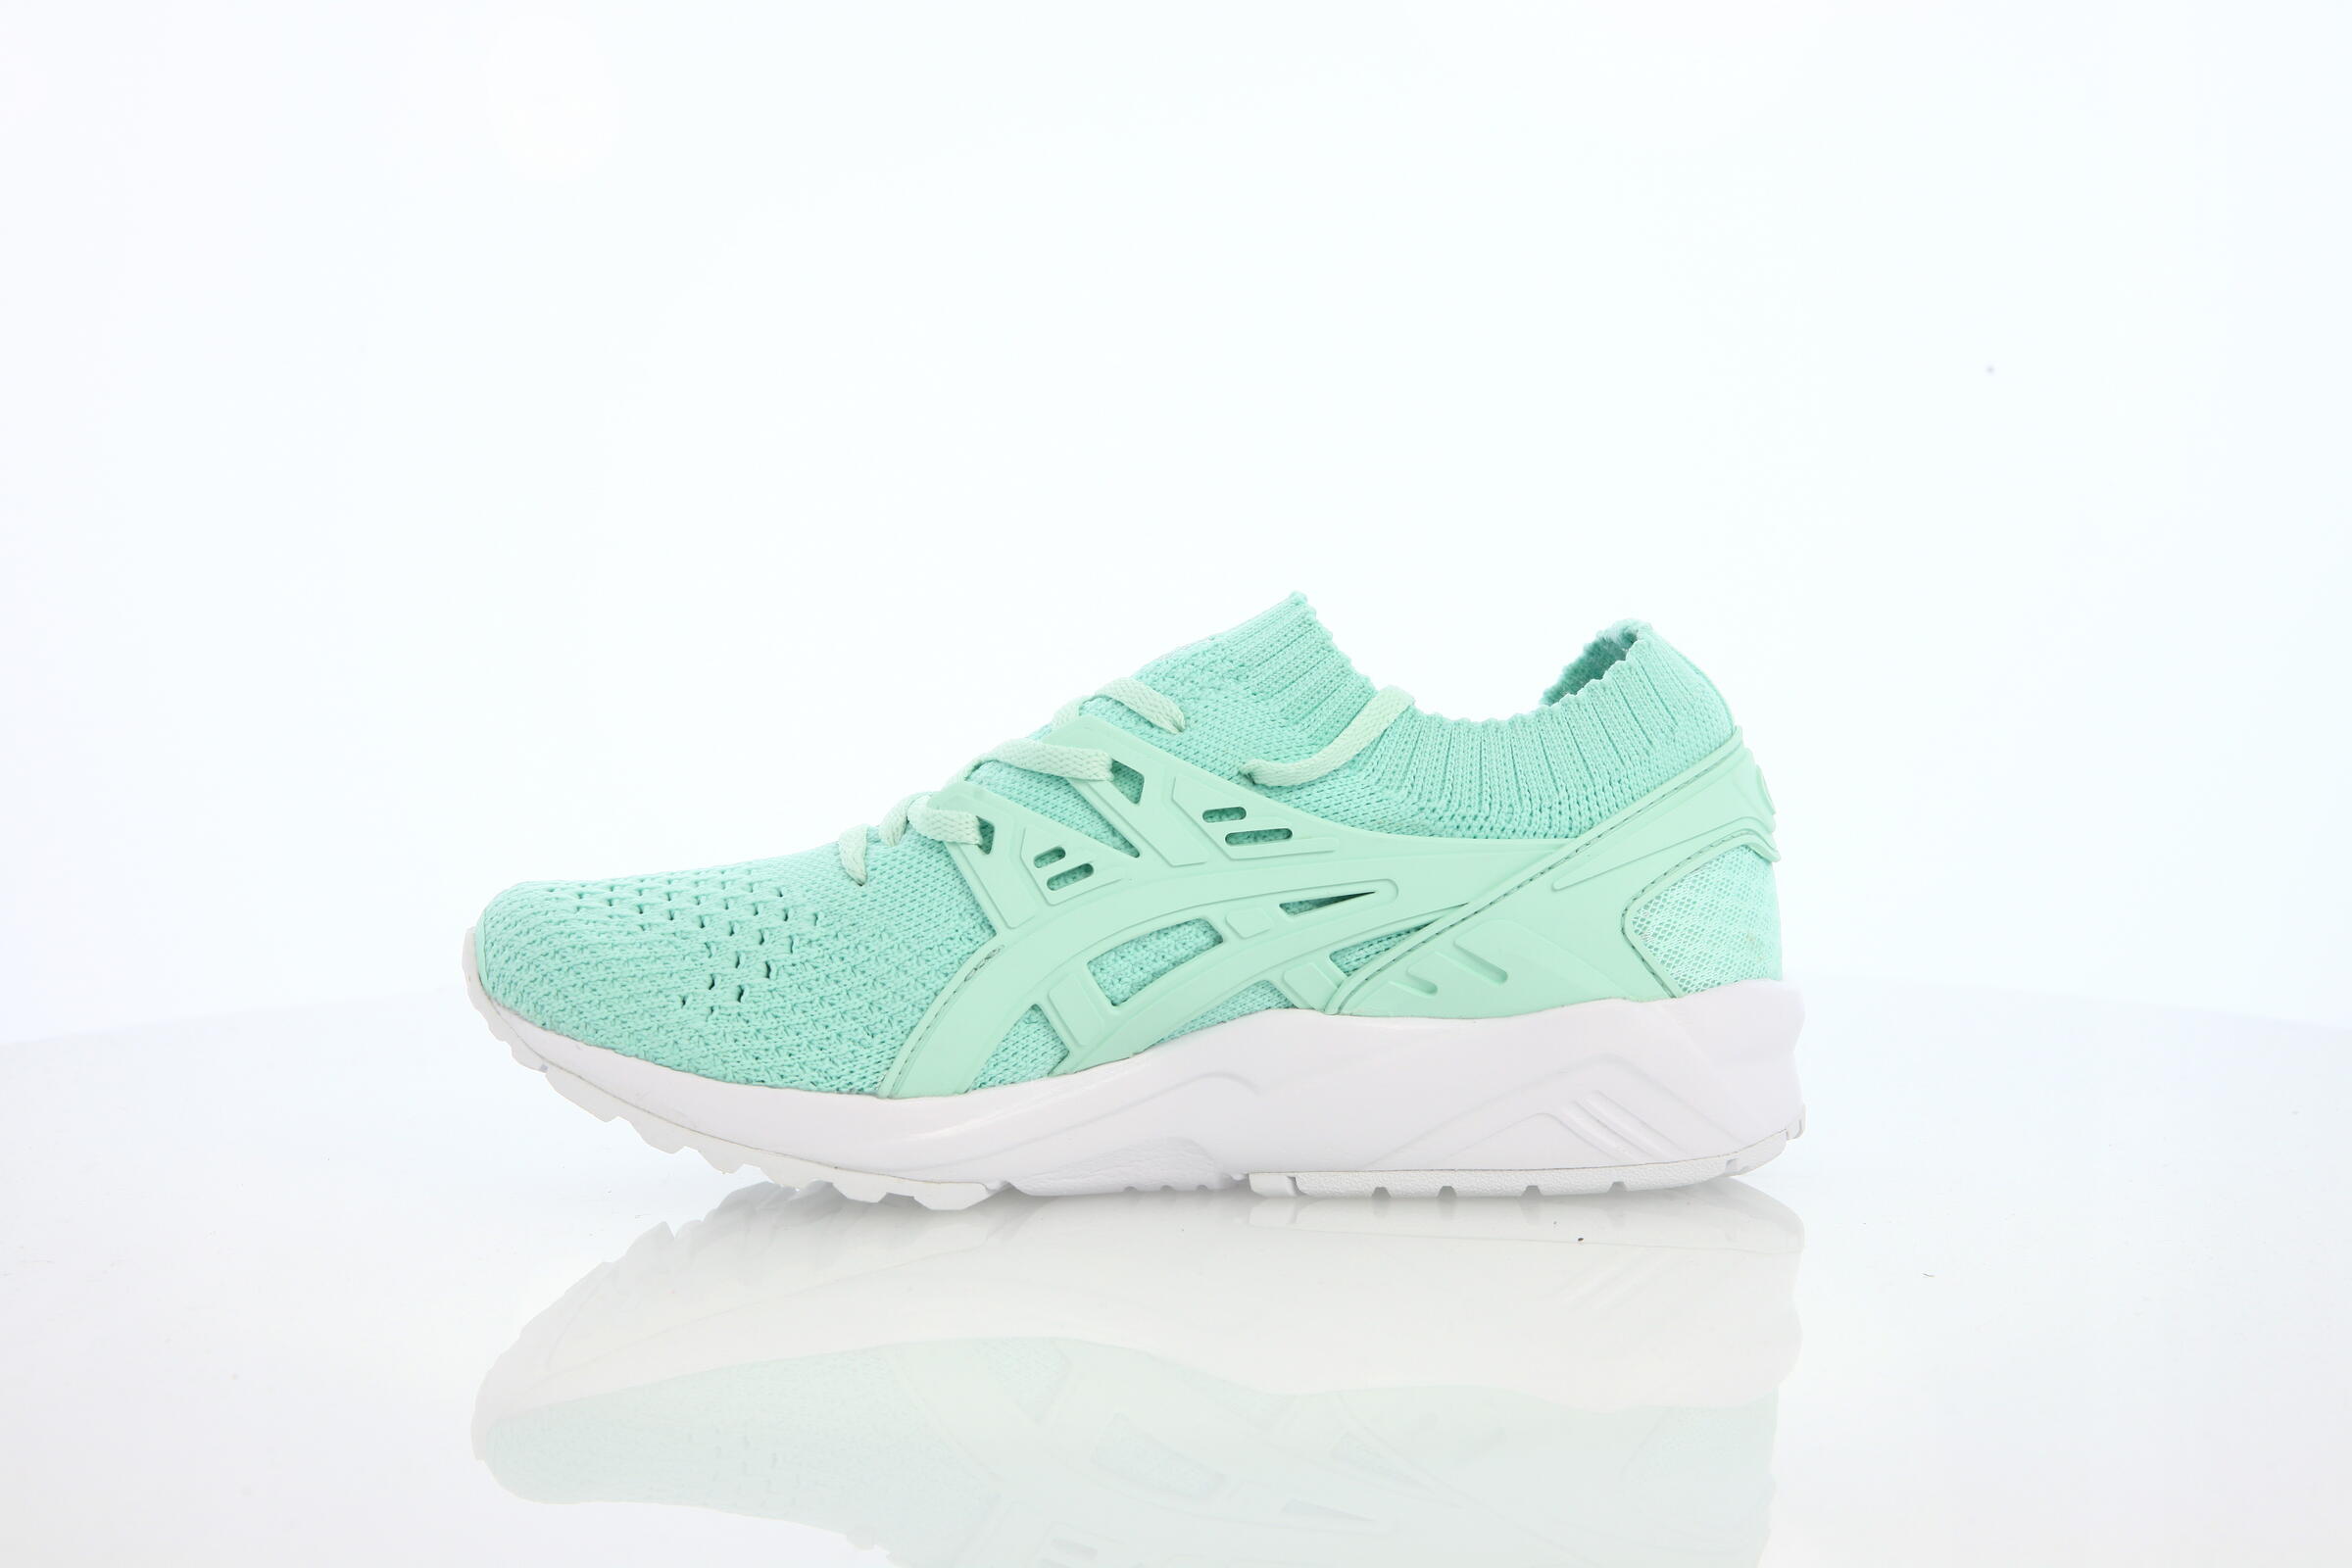 Asics Gel-Kayano Trainer One Piece Knit Pack "Bay"